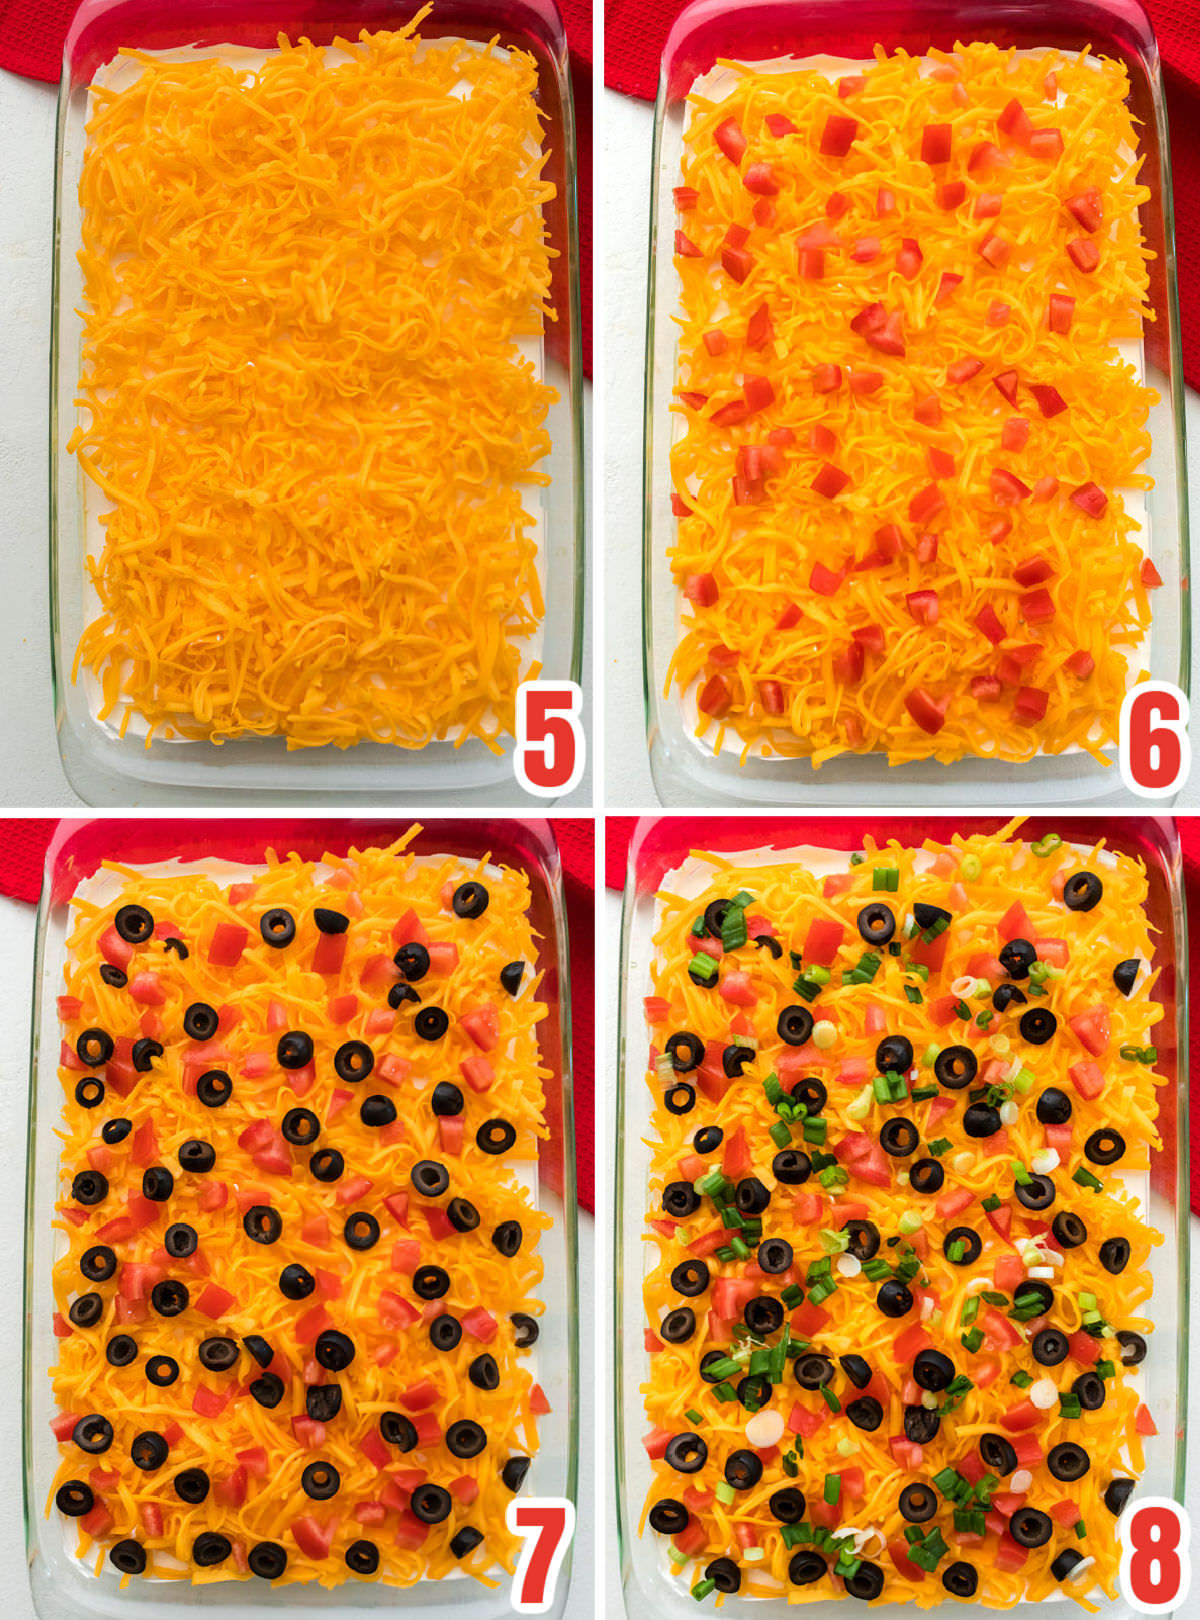 Collage image showing how to add the various layers of food for the 7 Layer Dip.